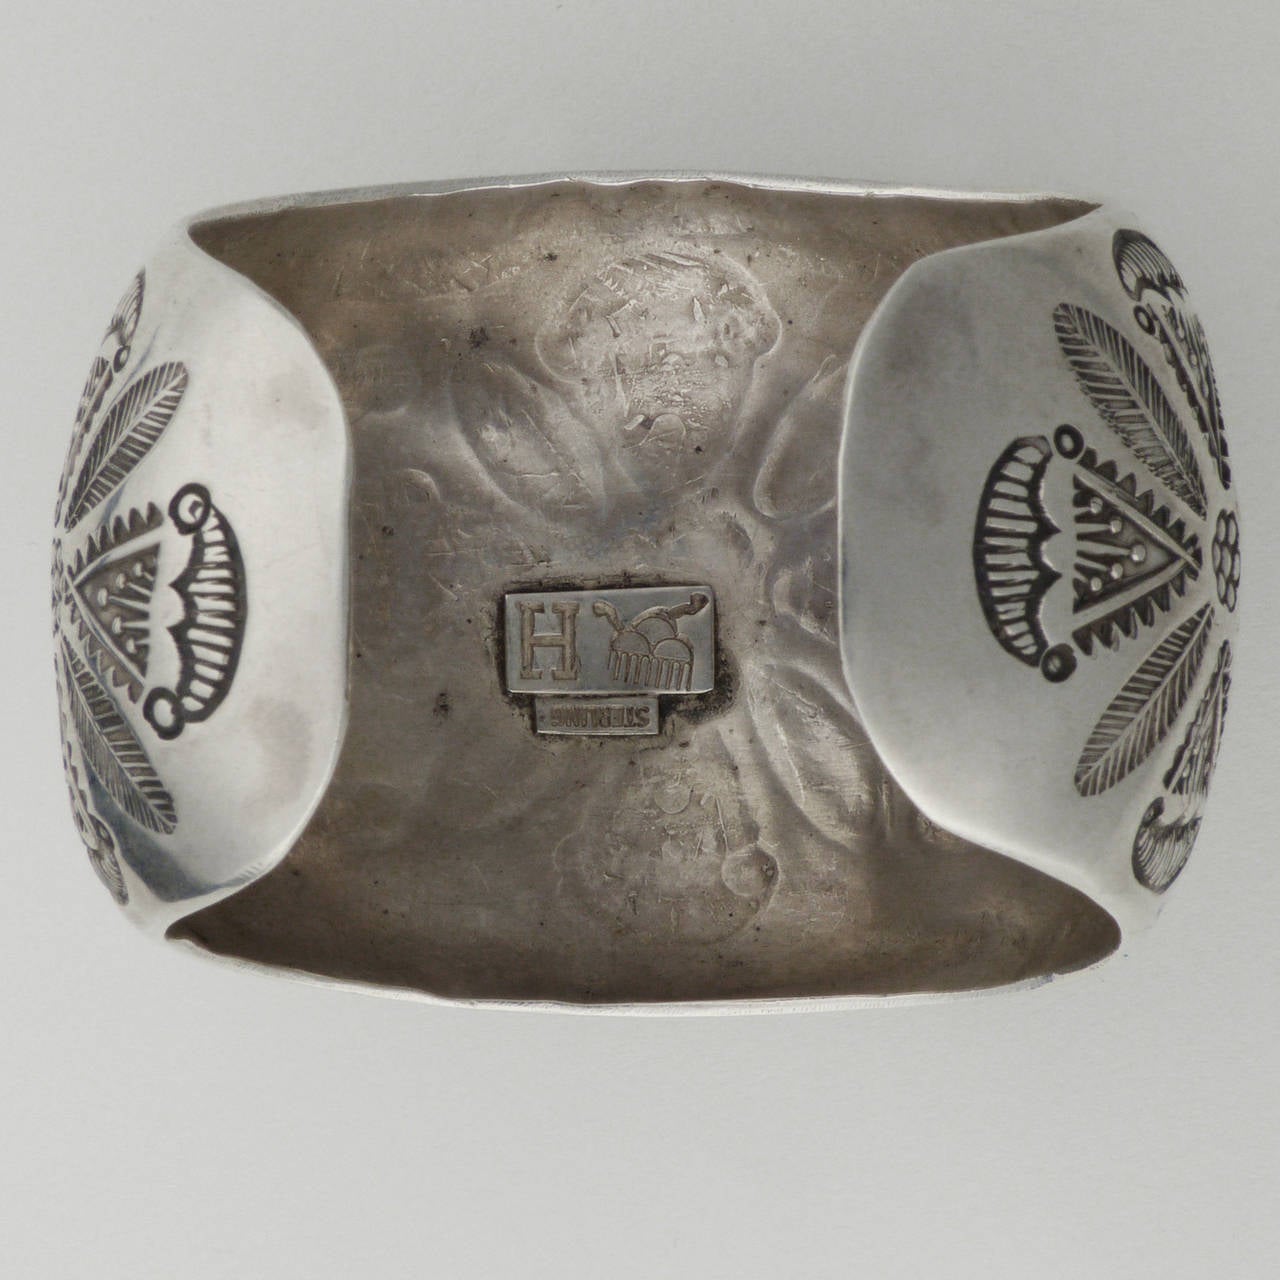 American Vintage Domed and Stamped Silver Cuff by Ralph Tawangyawma, circa 1940